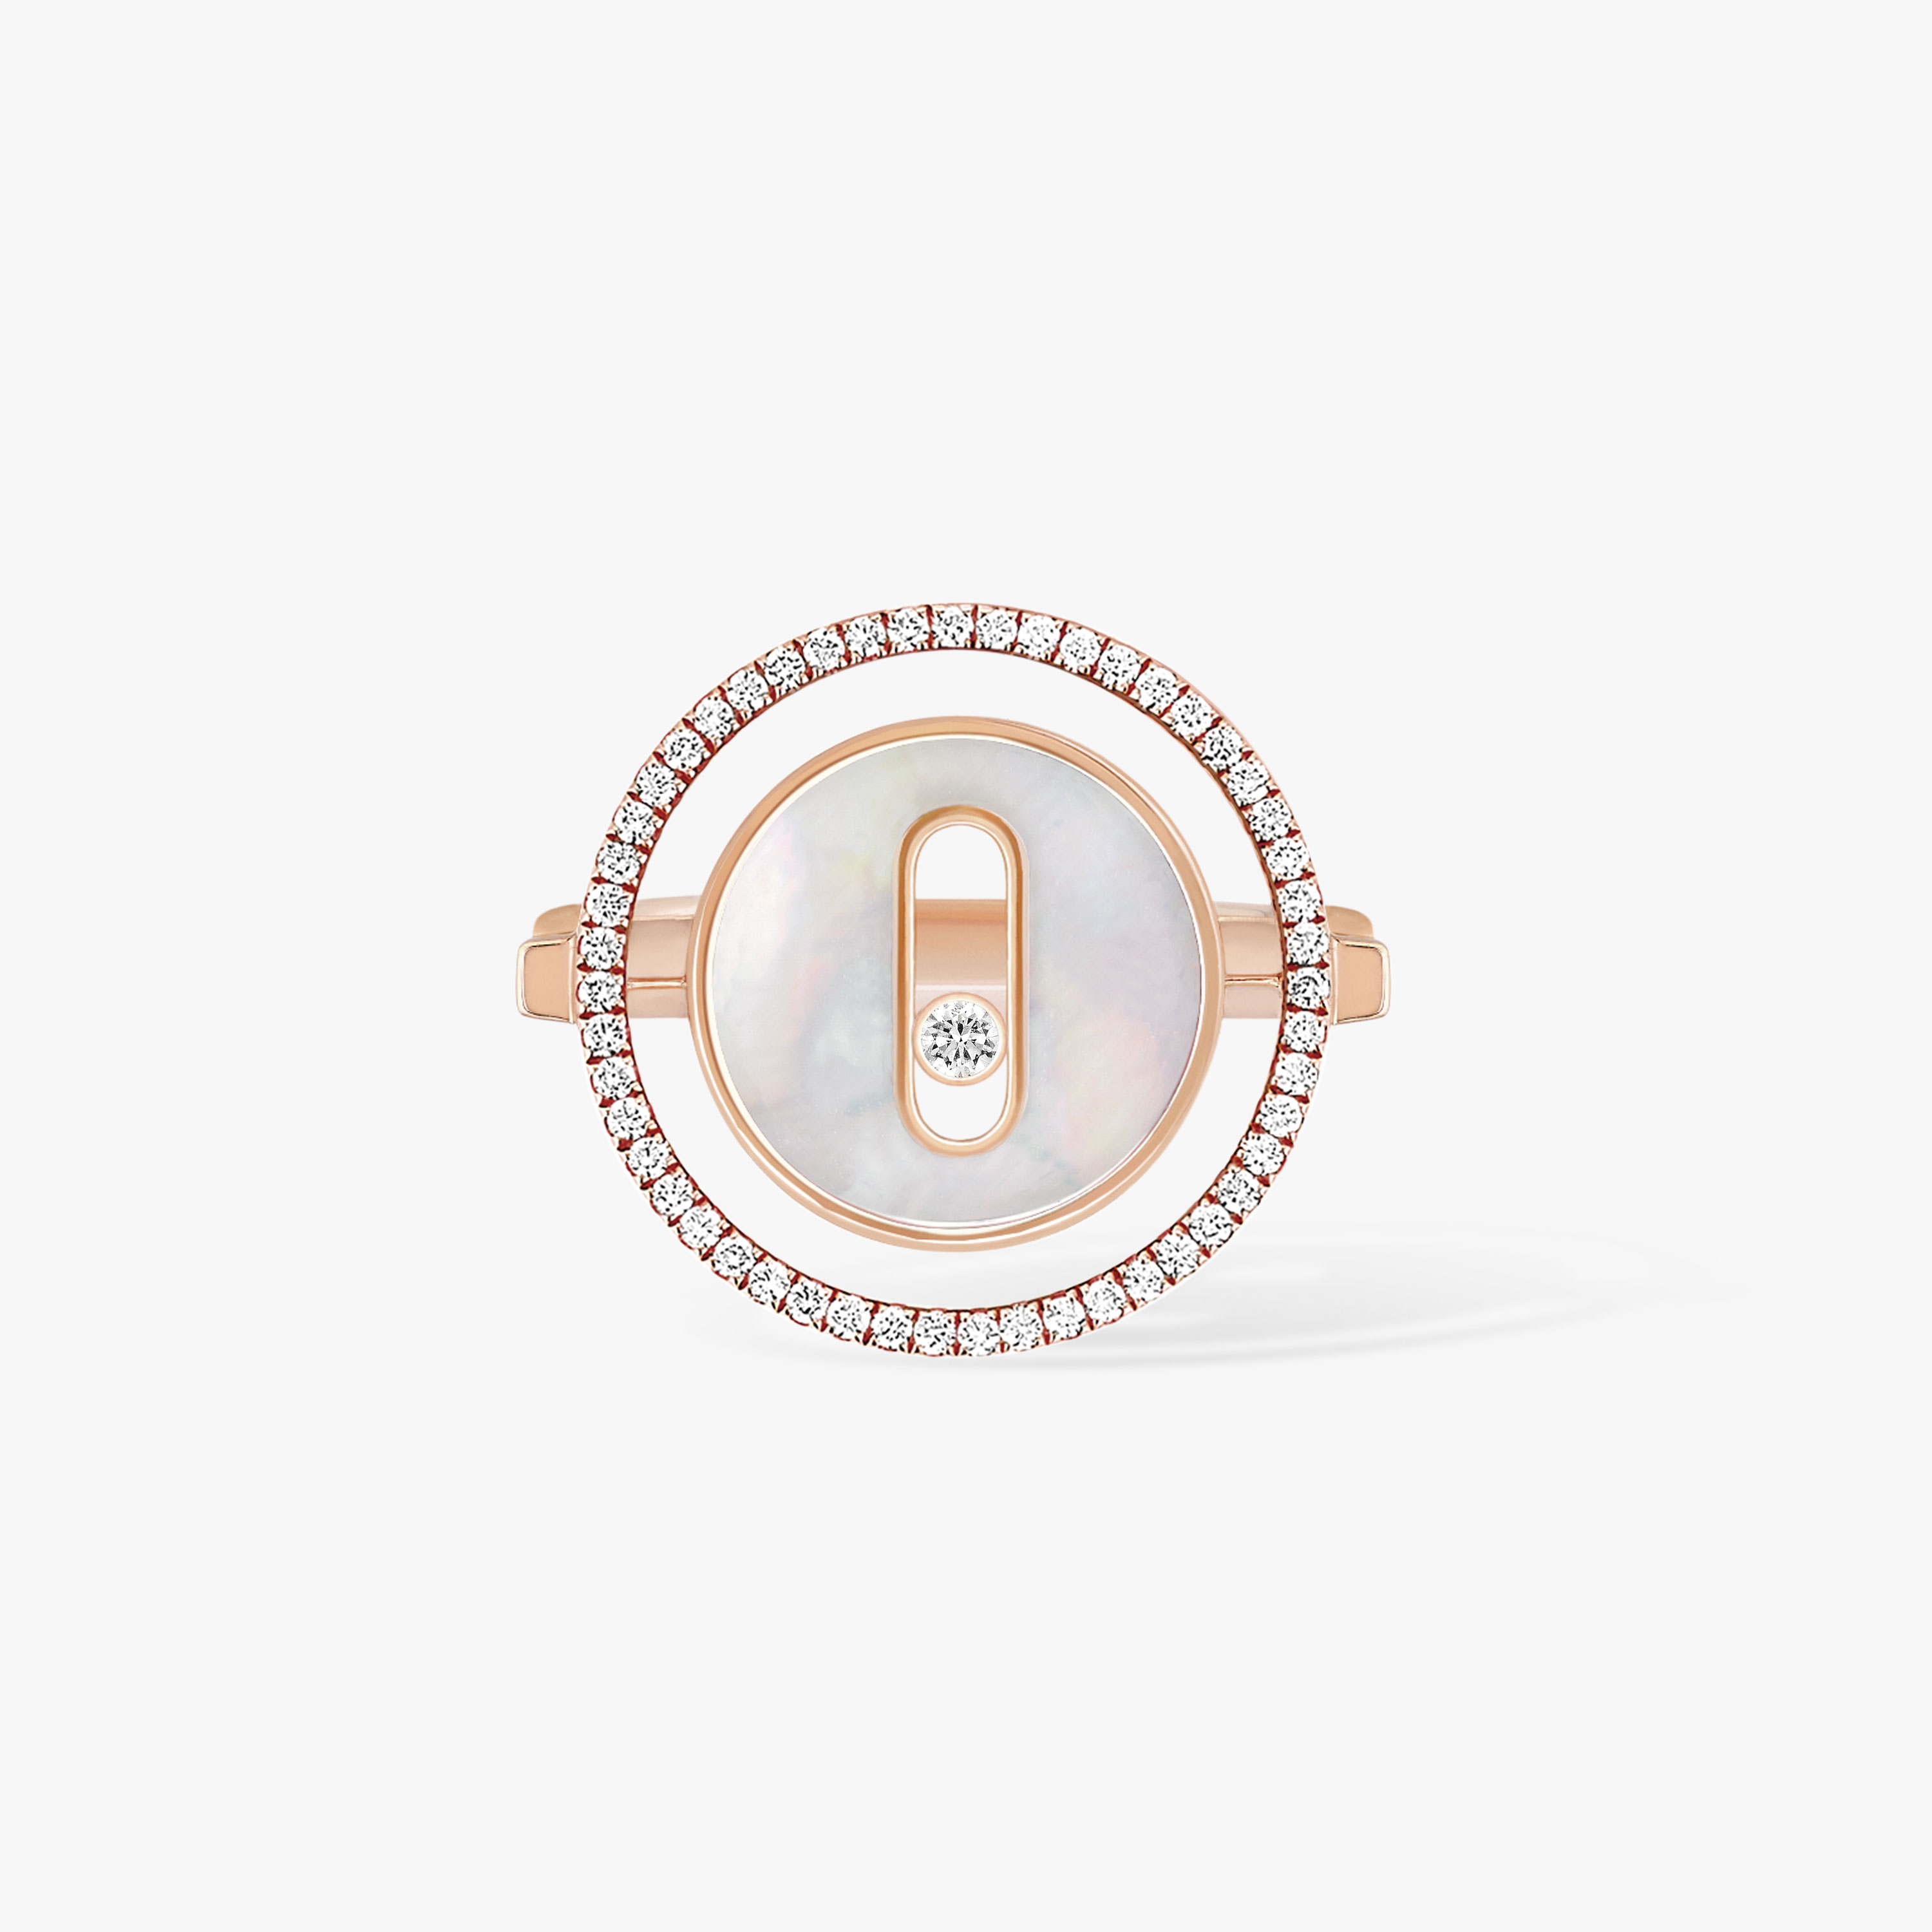 Bague Femme Or Rose Diamant Bague Lucky Move PM Nacre Blanche 11952-PG